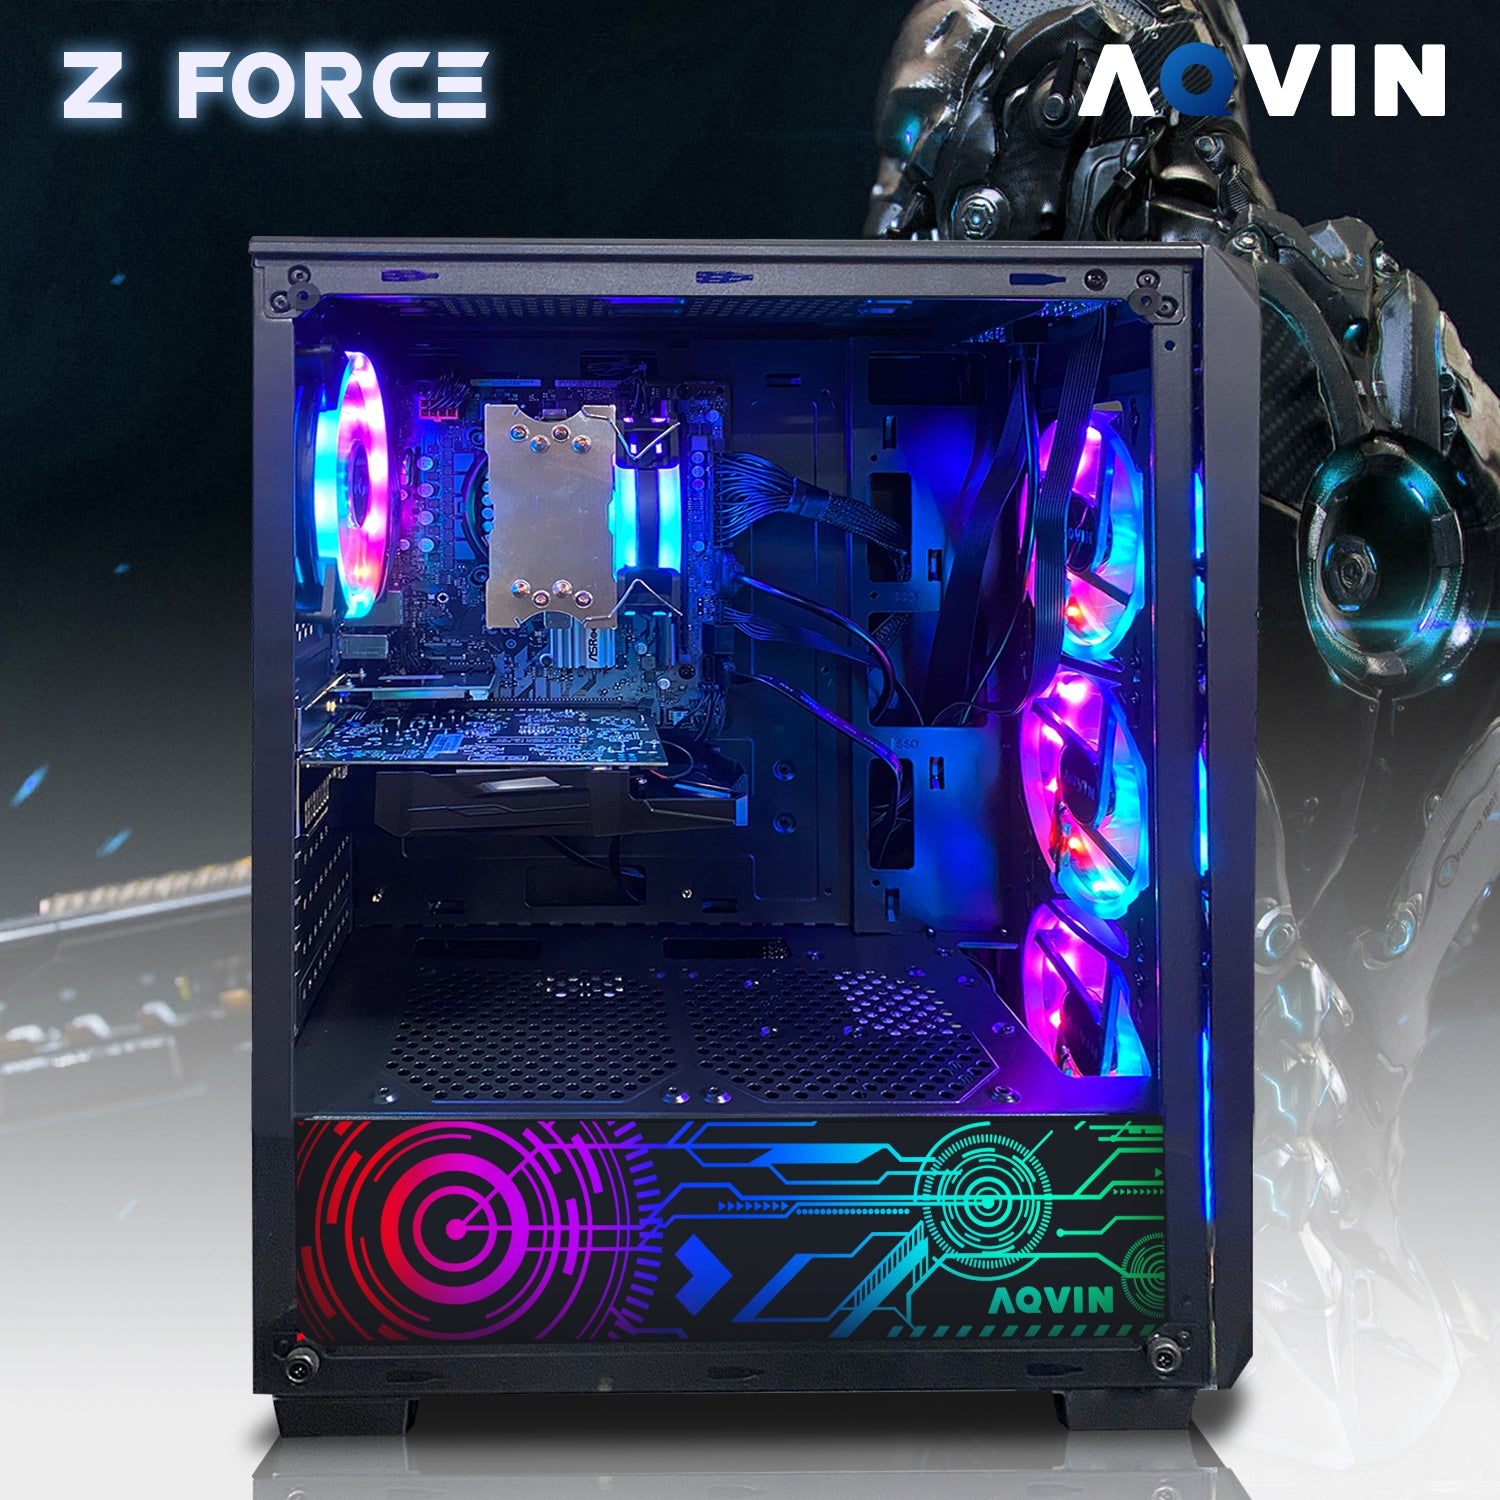 AQVIN Z-Force Gaming Desktop Tower Computer - RGB (Intel Core i7 up to 4.60 GHz/ 1TB - 2TB SSD (fast boot)/ 32GB DDR4 RAM/ RTX 3050,3060, 4060/ Windows 11 Pro/ Gaming Keyboard and Mouse) WIFI